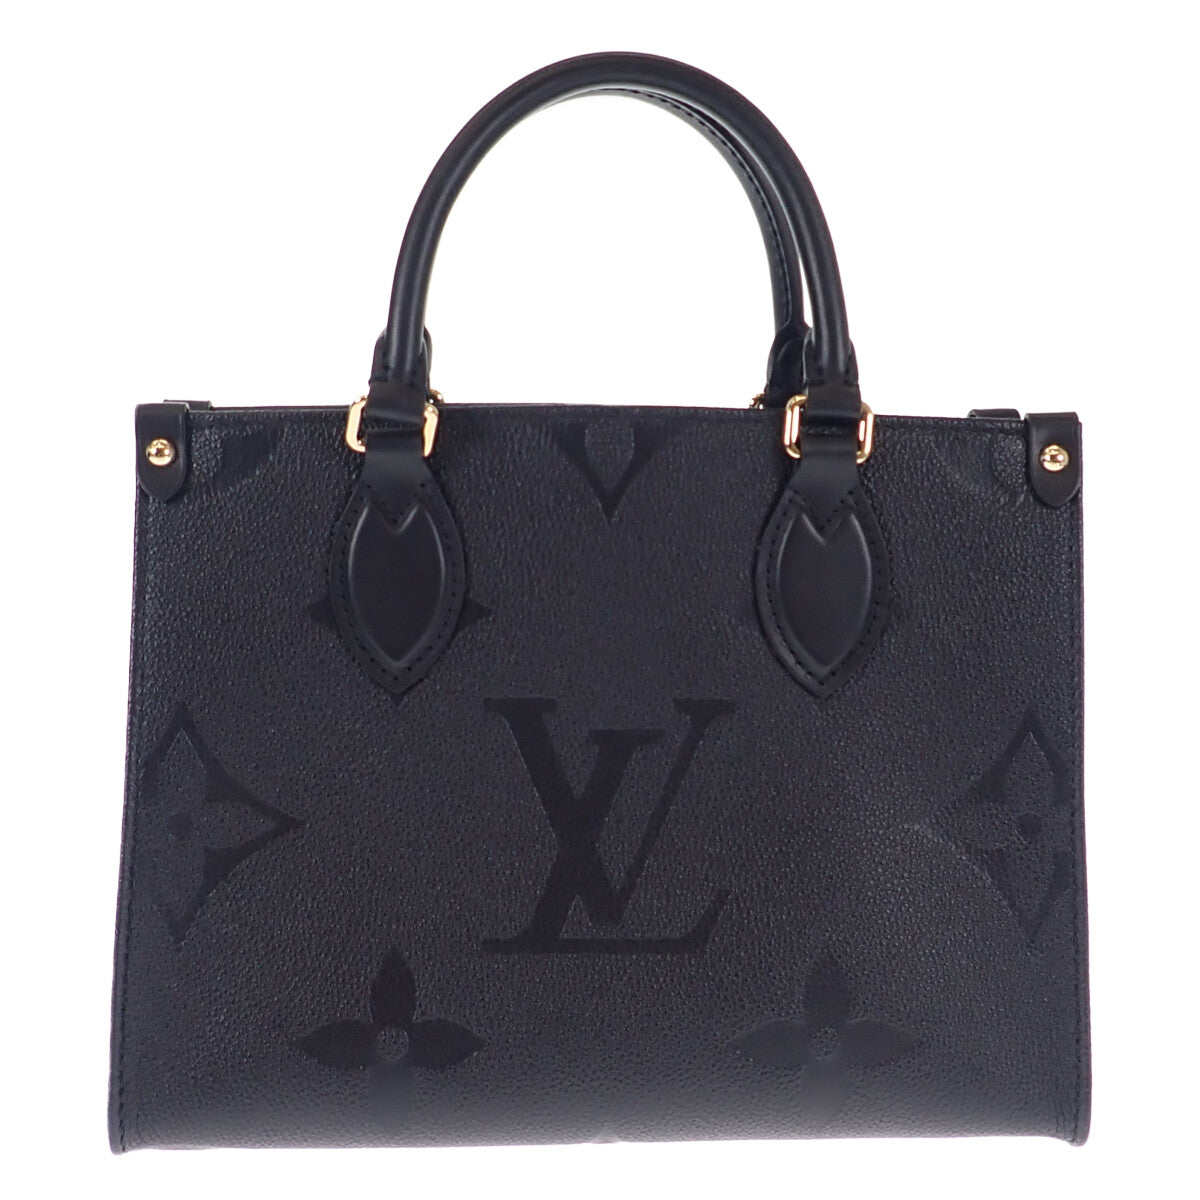 Louis Vuitton On the Go PM Leather Tote Bag M45653 in Excellent condition